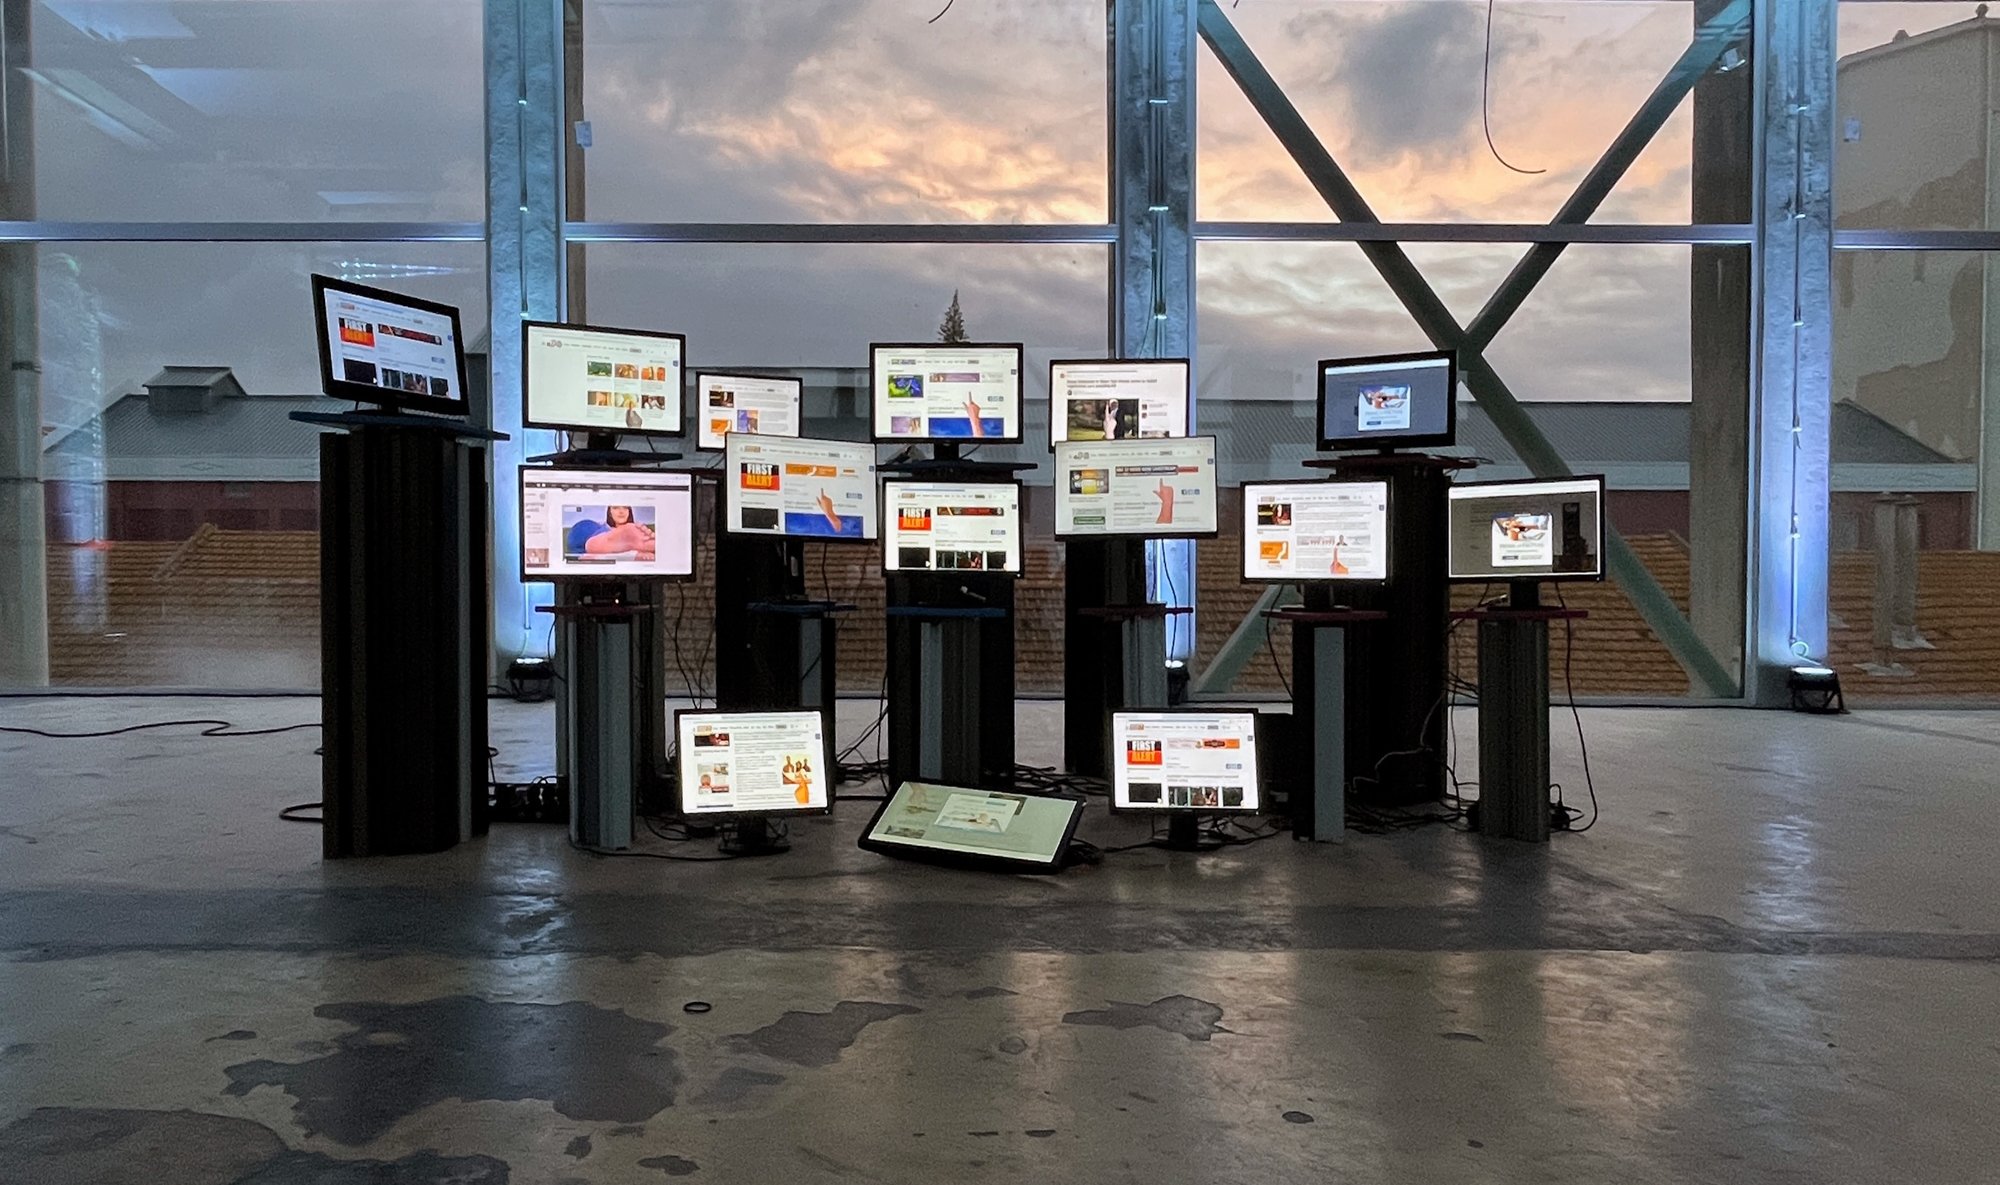 Installation of “Synthetic Messenger”: 15 screens on pedestals of different heights showing bots browsing the web.